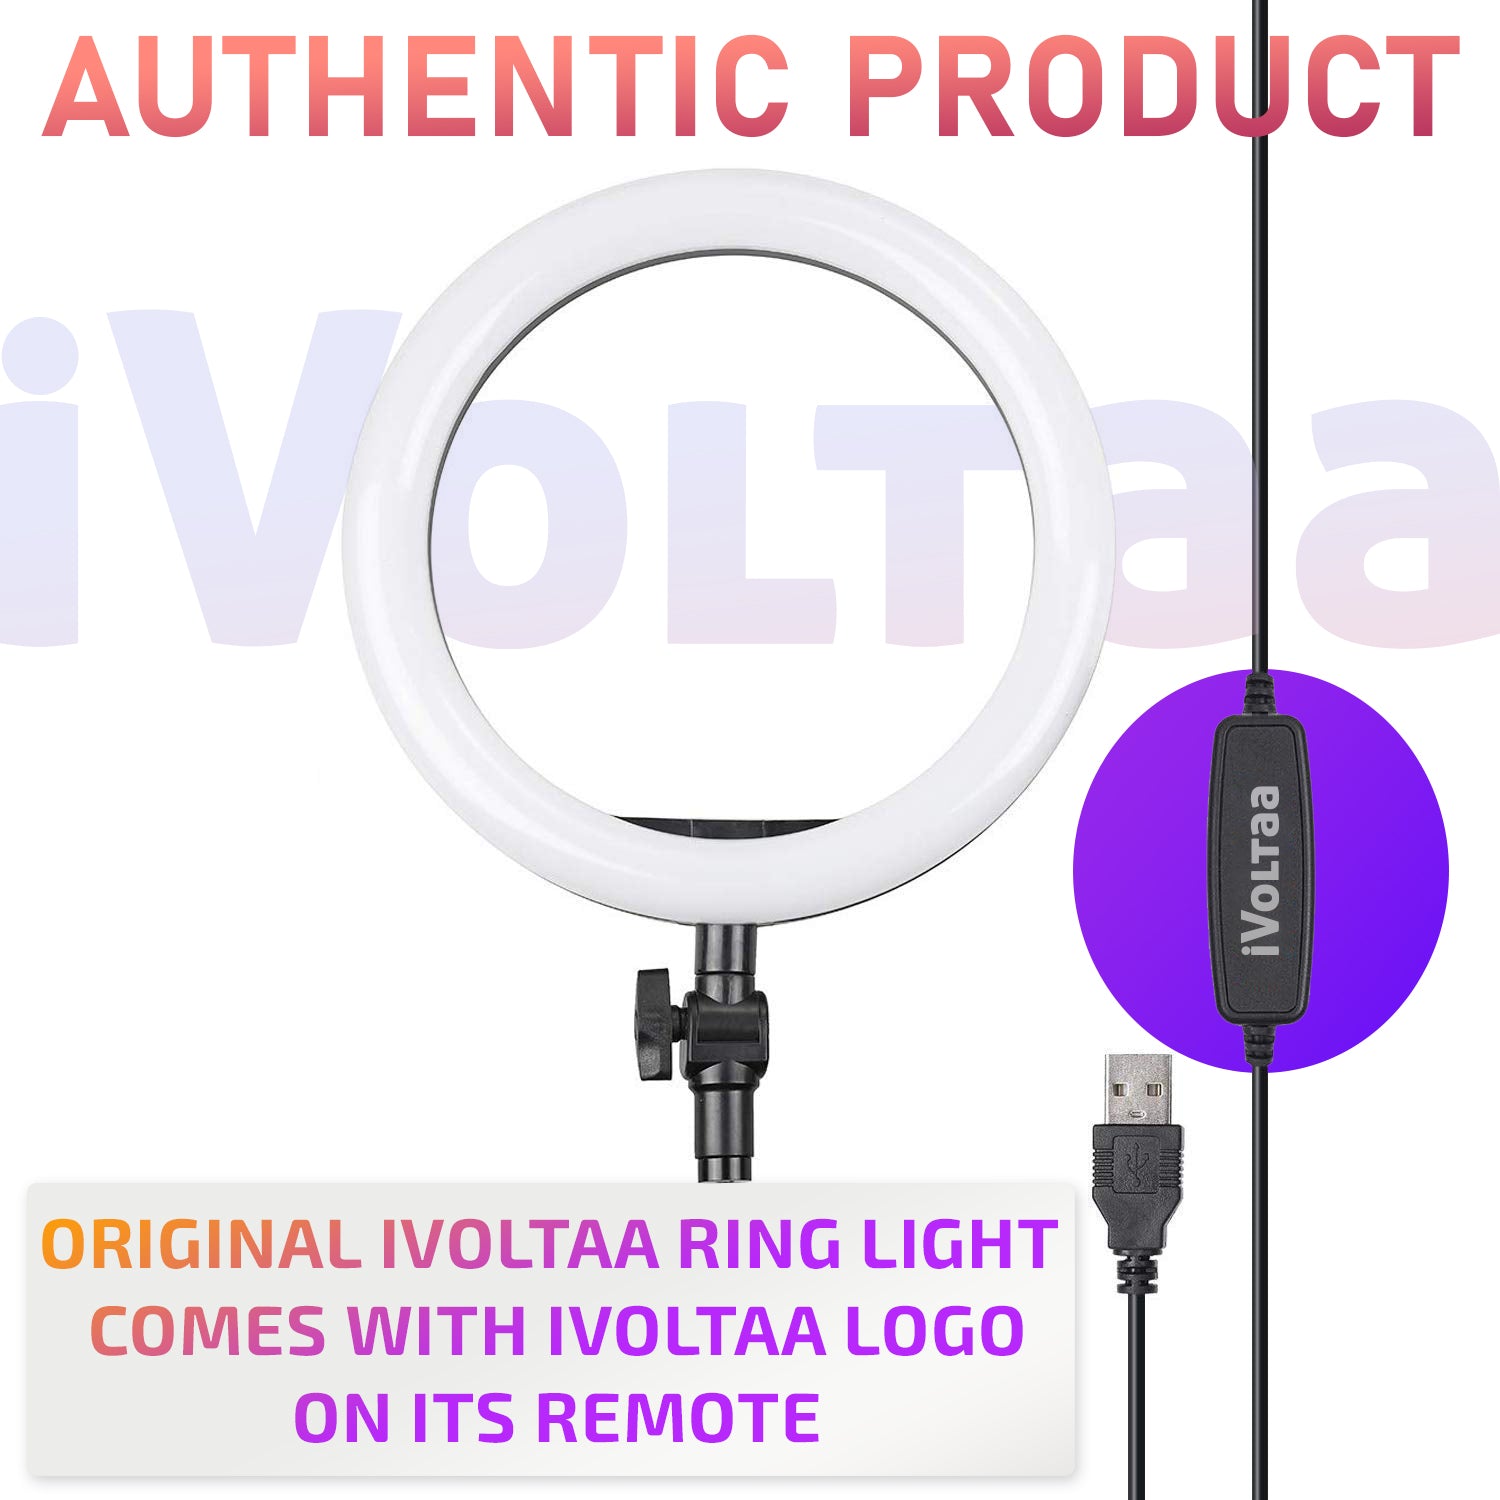 Original iVoltaa ring light comes with logo printed on the controller.